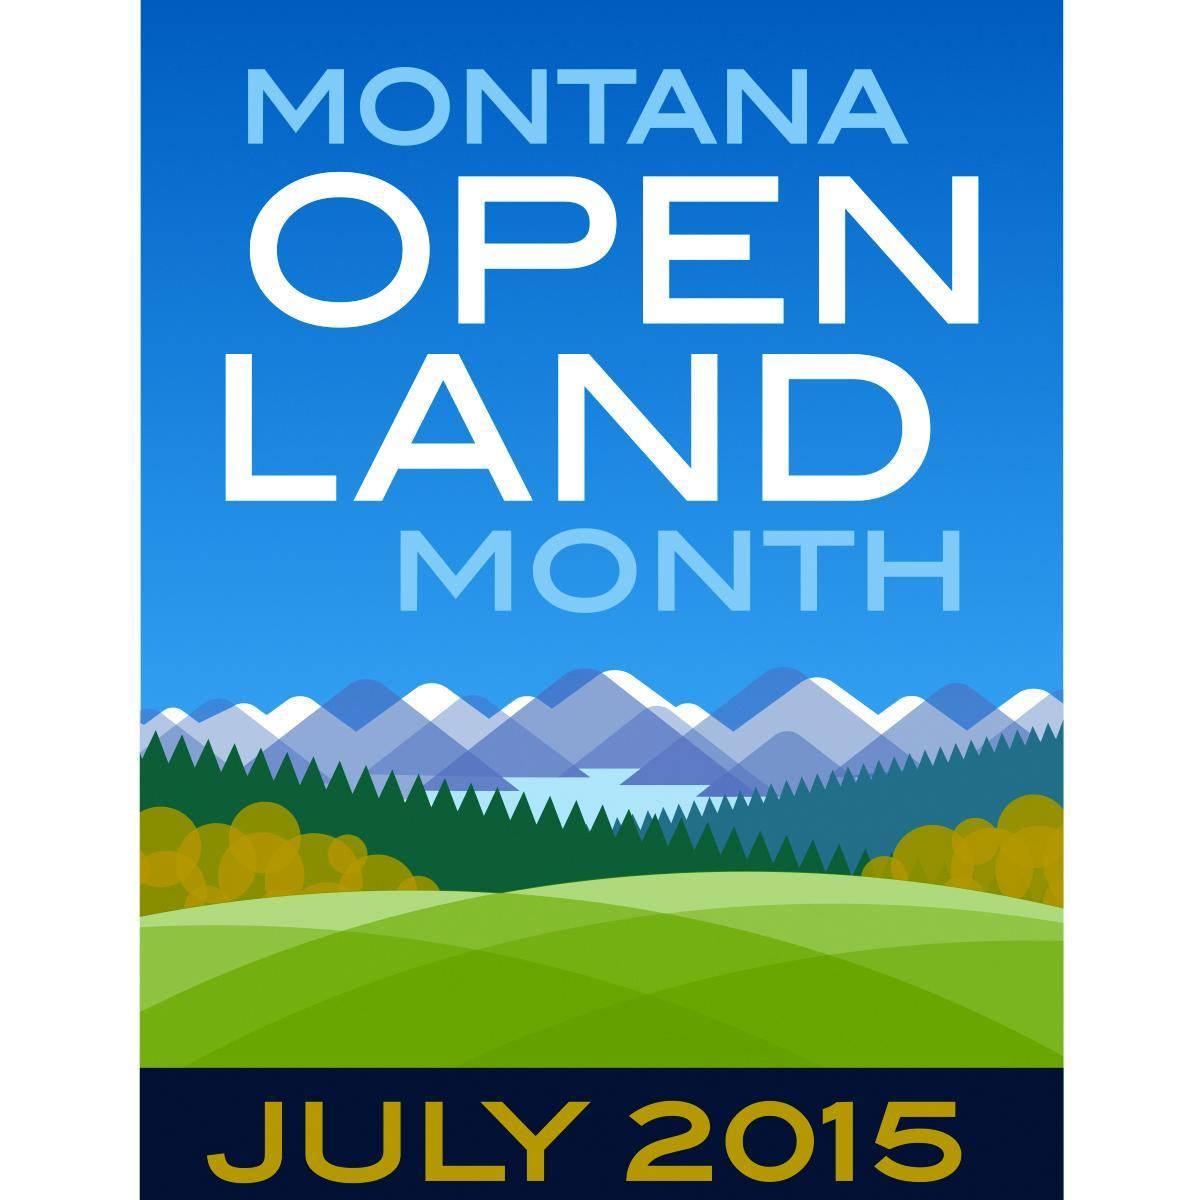 Celebrating all that open land represents in Montana: agriculture, recreation, wildlife, heritage, freedom to roam.